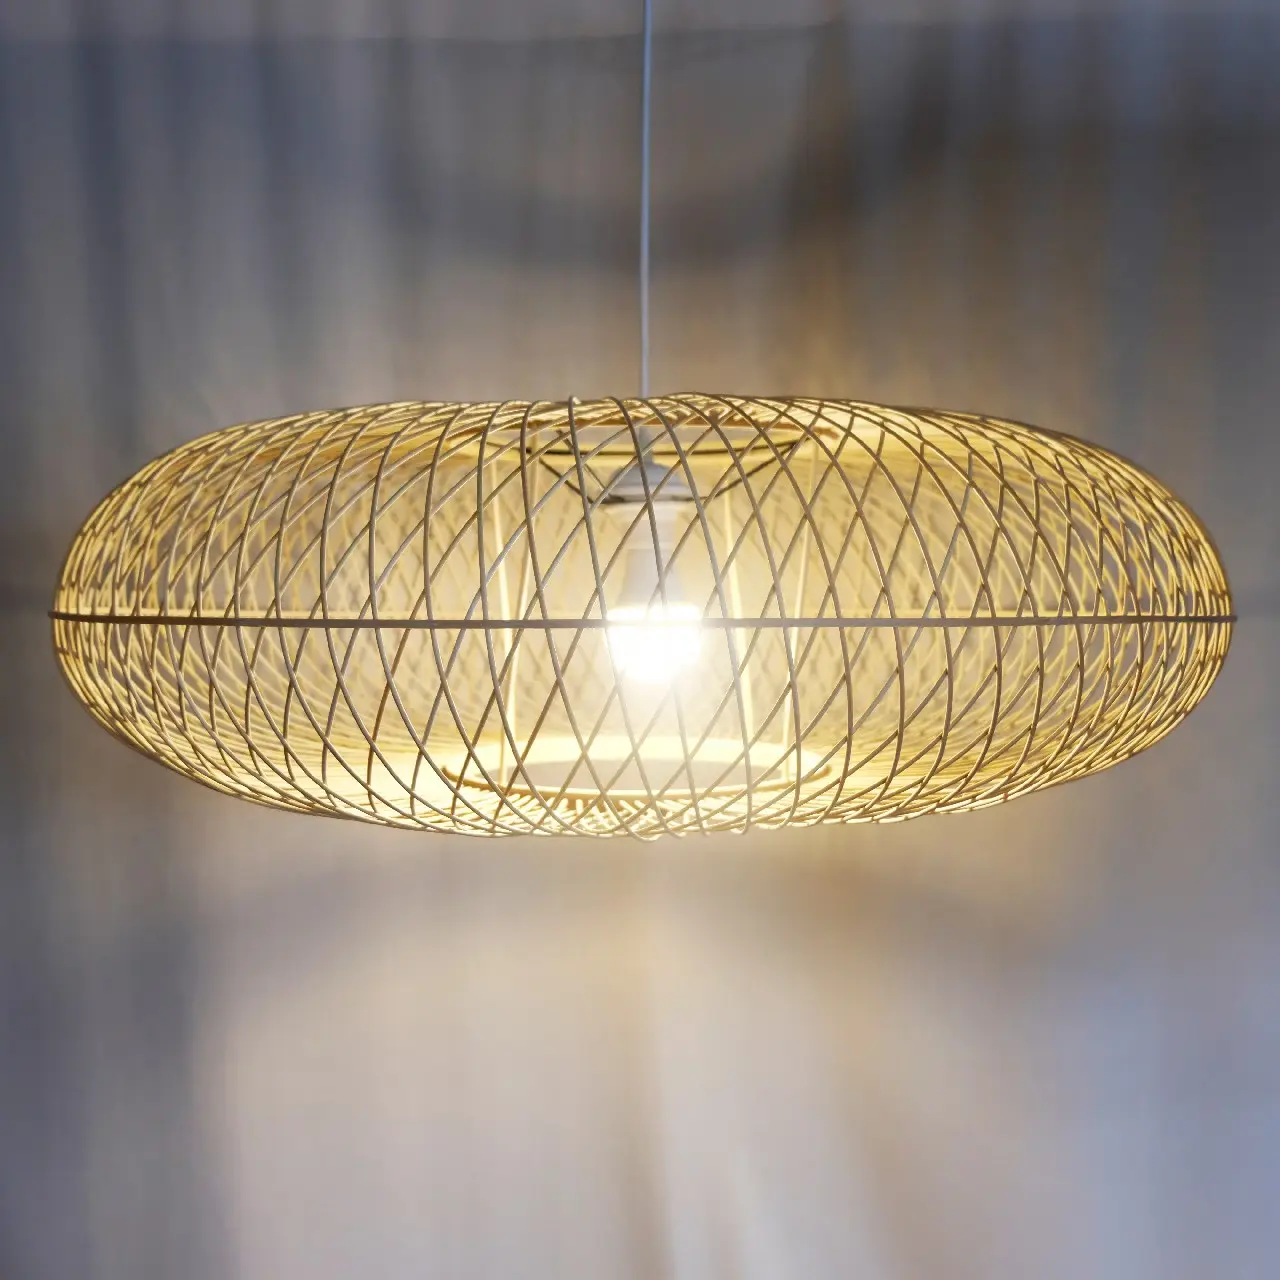 High quality bamboo lampshade chandelier for restaurant home decor lampshade hotel from Vietnam